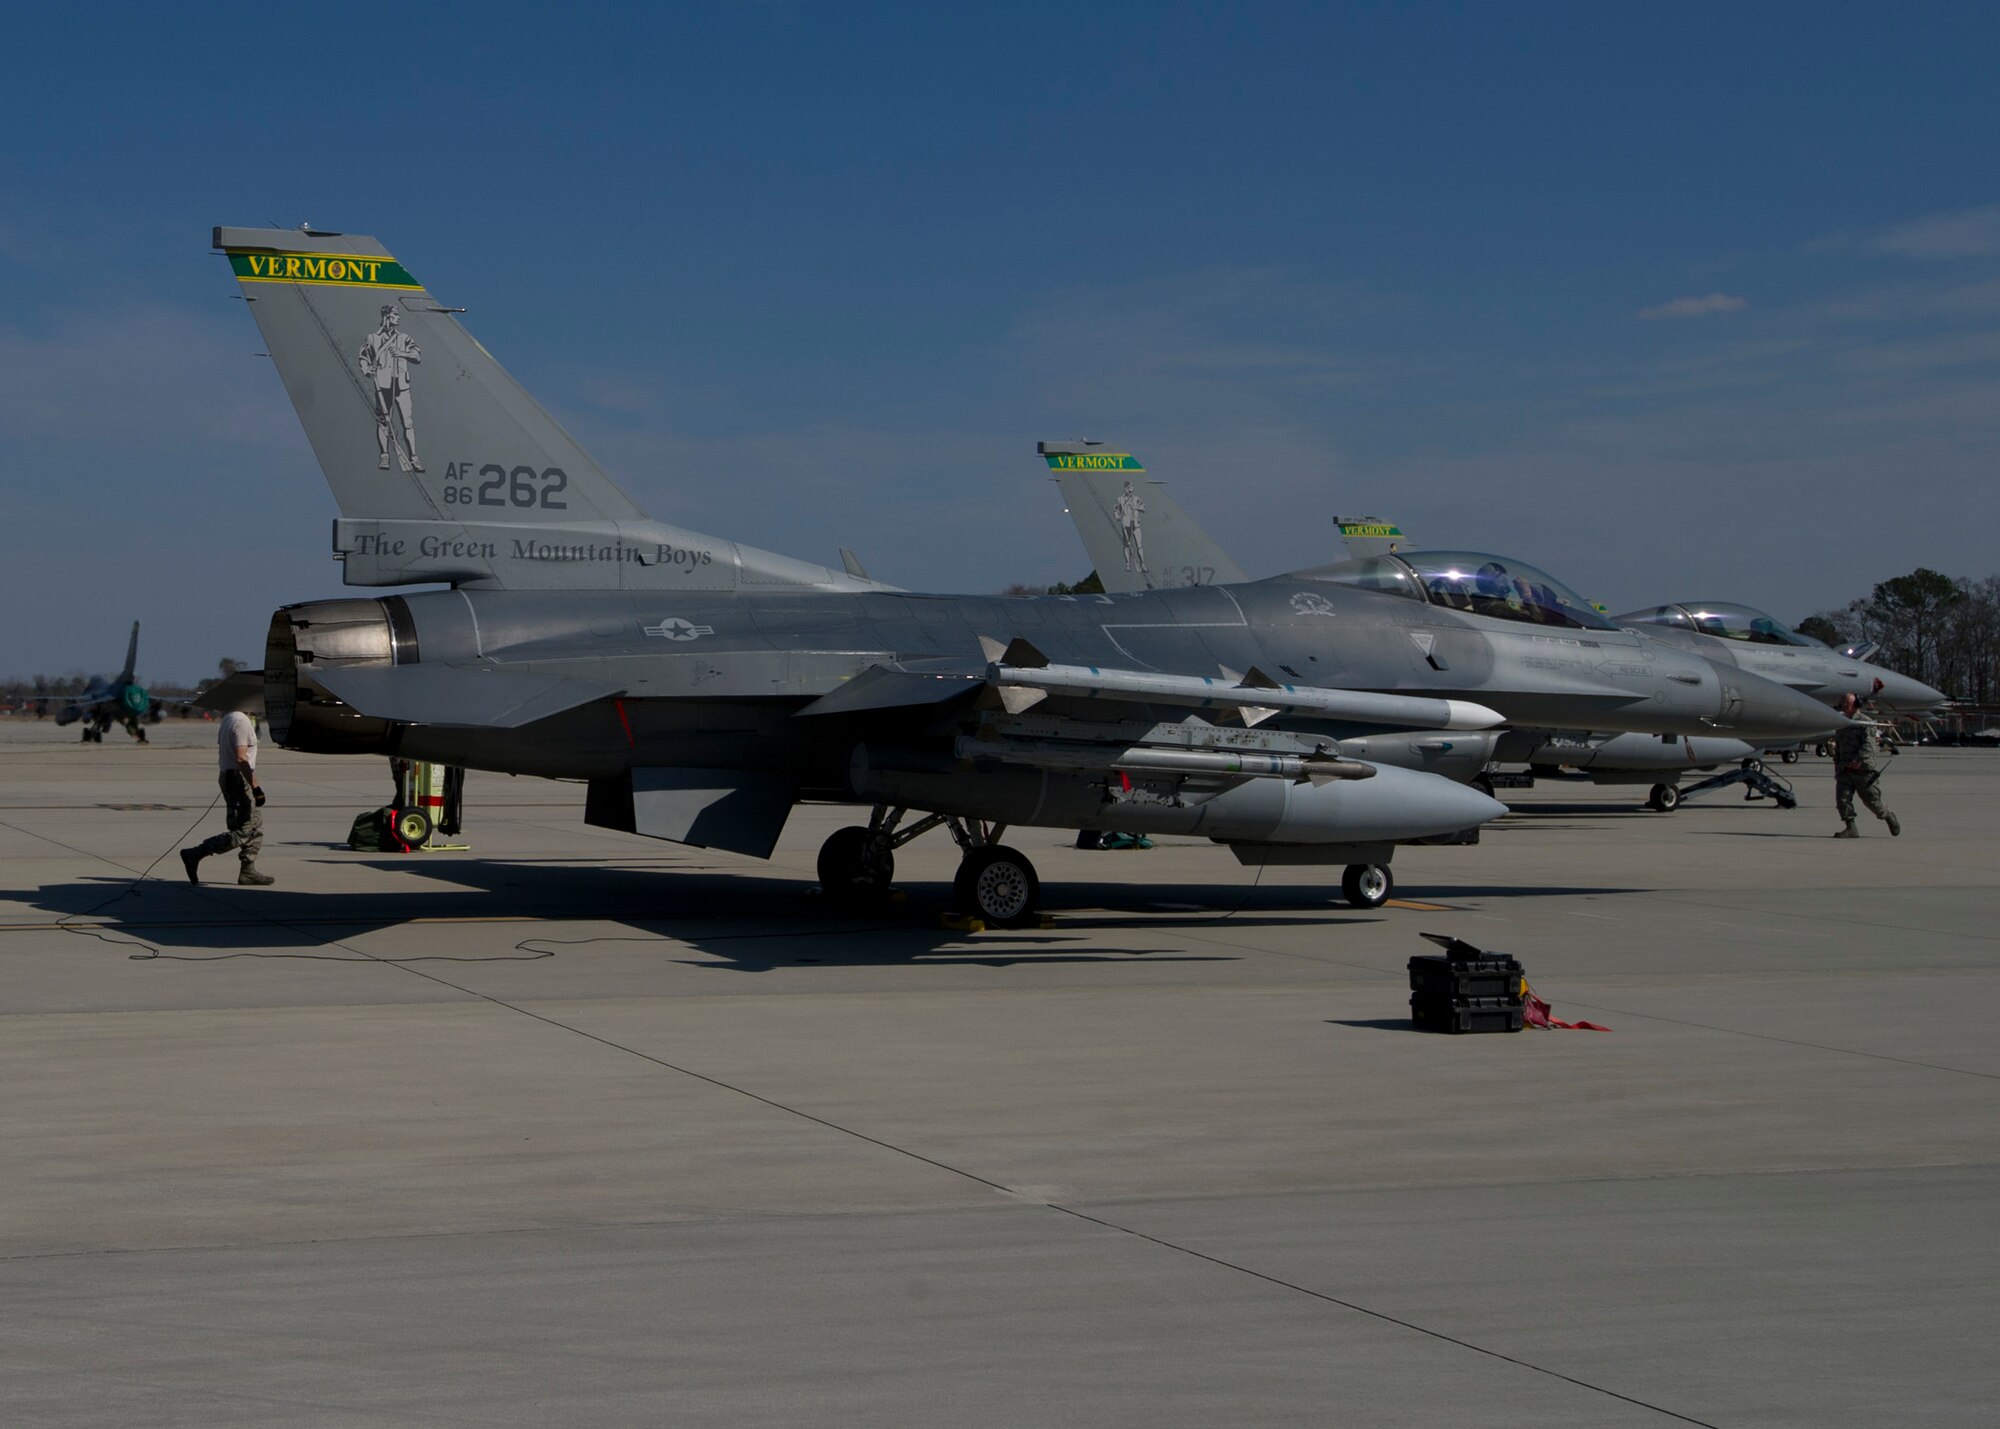 F-16 Fighting Falcons from the 134th Fighter Squadron, Air National Guard Vermont, start their engines and prepare for a sortie Feb. 10 at the Savannah Combat Readiness Training Center, 165th Airlift Wing, Savannah Air National Guard, Ga. (U.S. Air Force photo by Senior Airman Christopher Reel) 